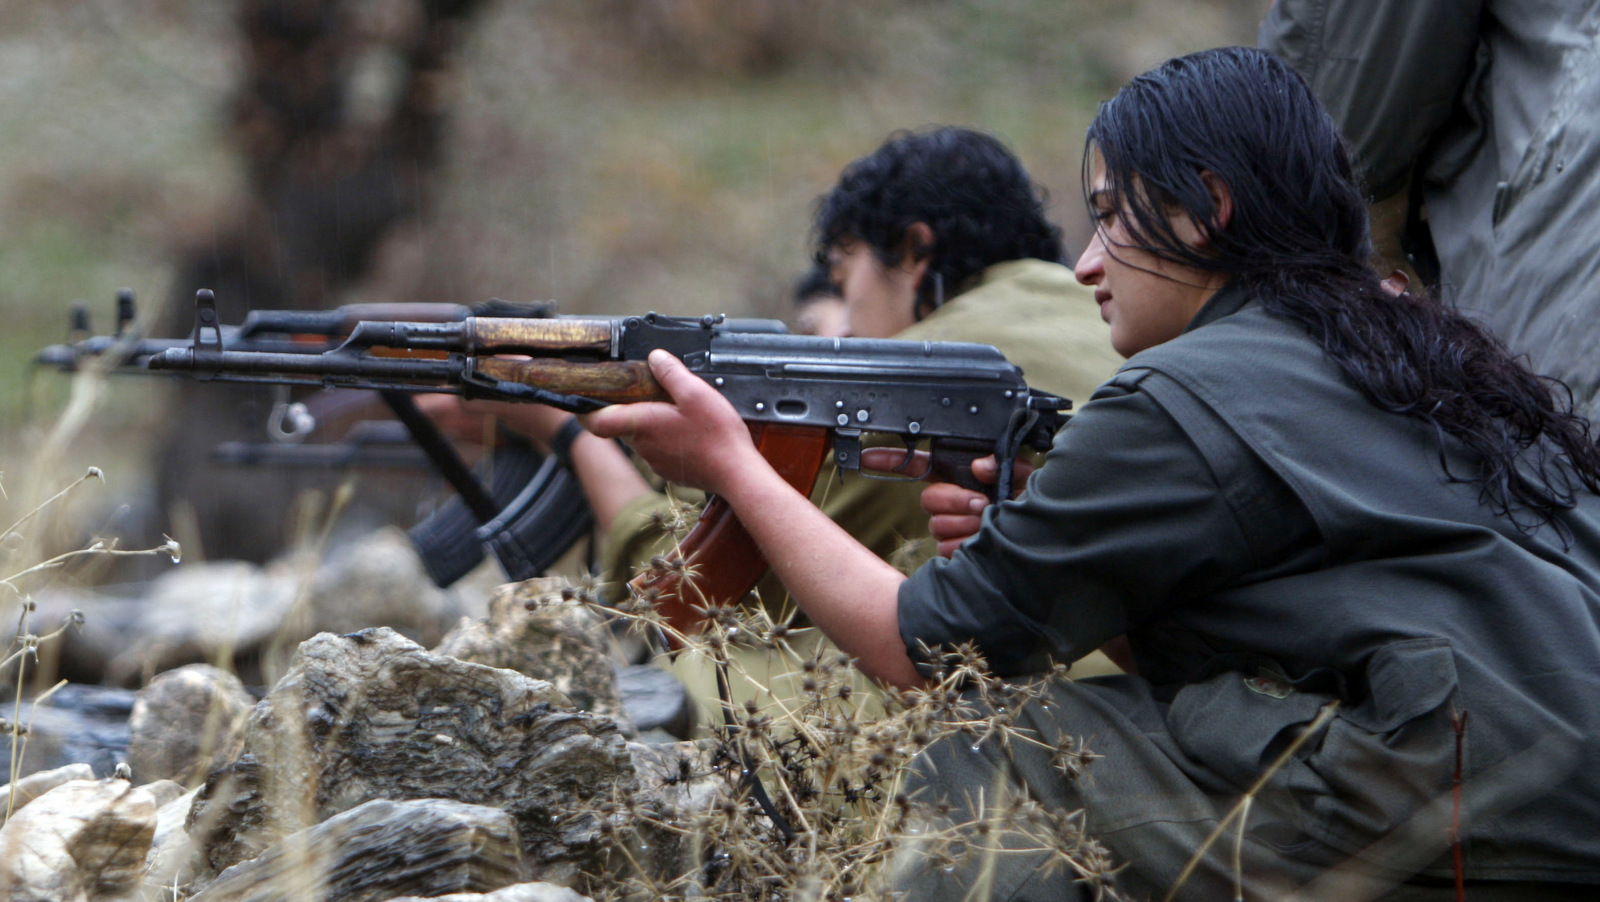 In this 2009 photo, a member of the Free Life Party, or PJAK, fires a rifle at a clandestine weapons training camp in the Qandil mountains of northern Iraq. (AP/Yahya Ahmed)